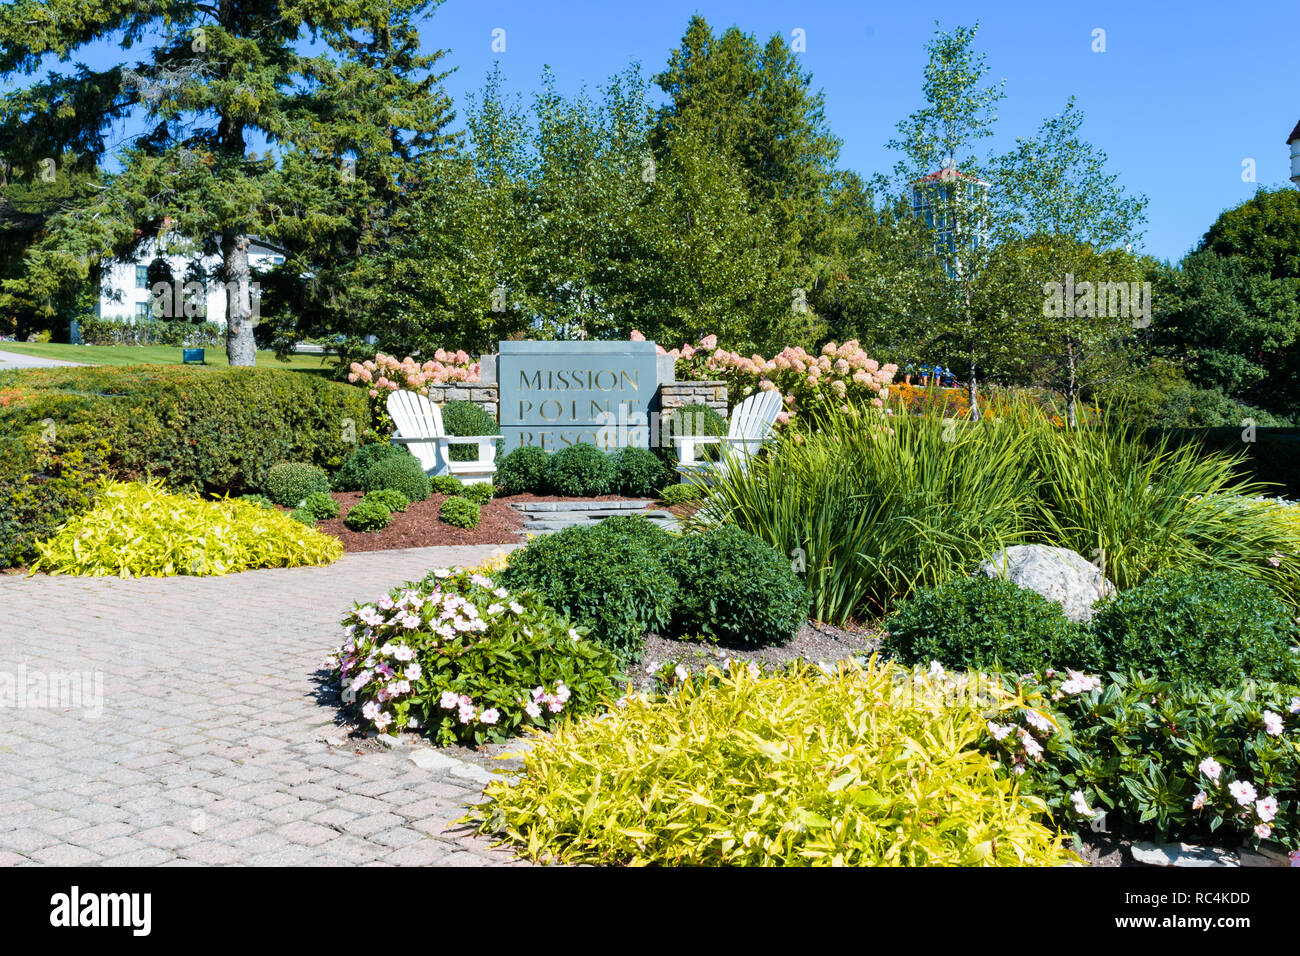 Mackinac Island, Michigan / United States - September 17, 2018: Flower gardens and sign of Mission Point Resort Stock Photo